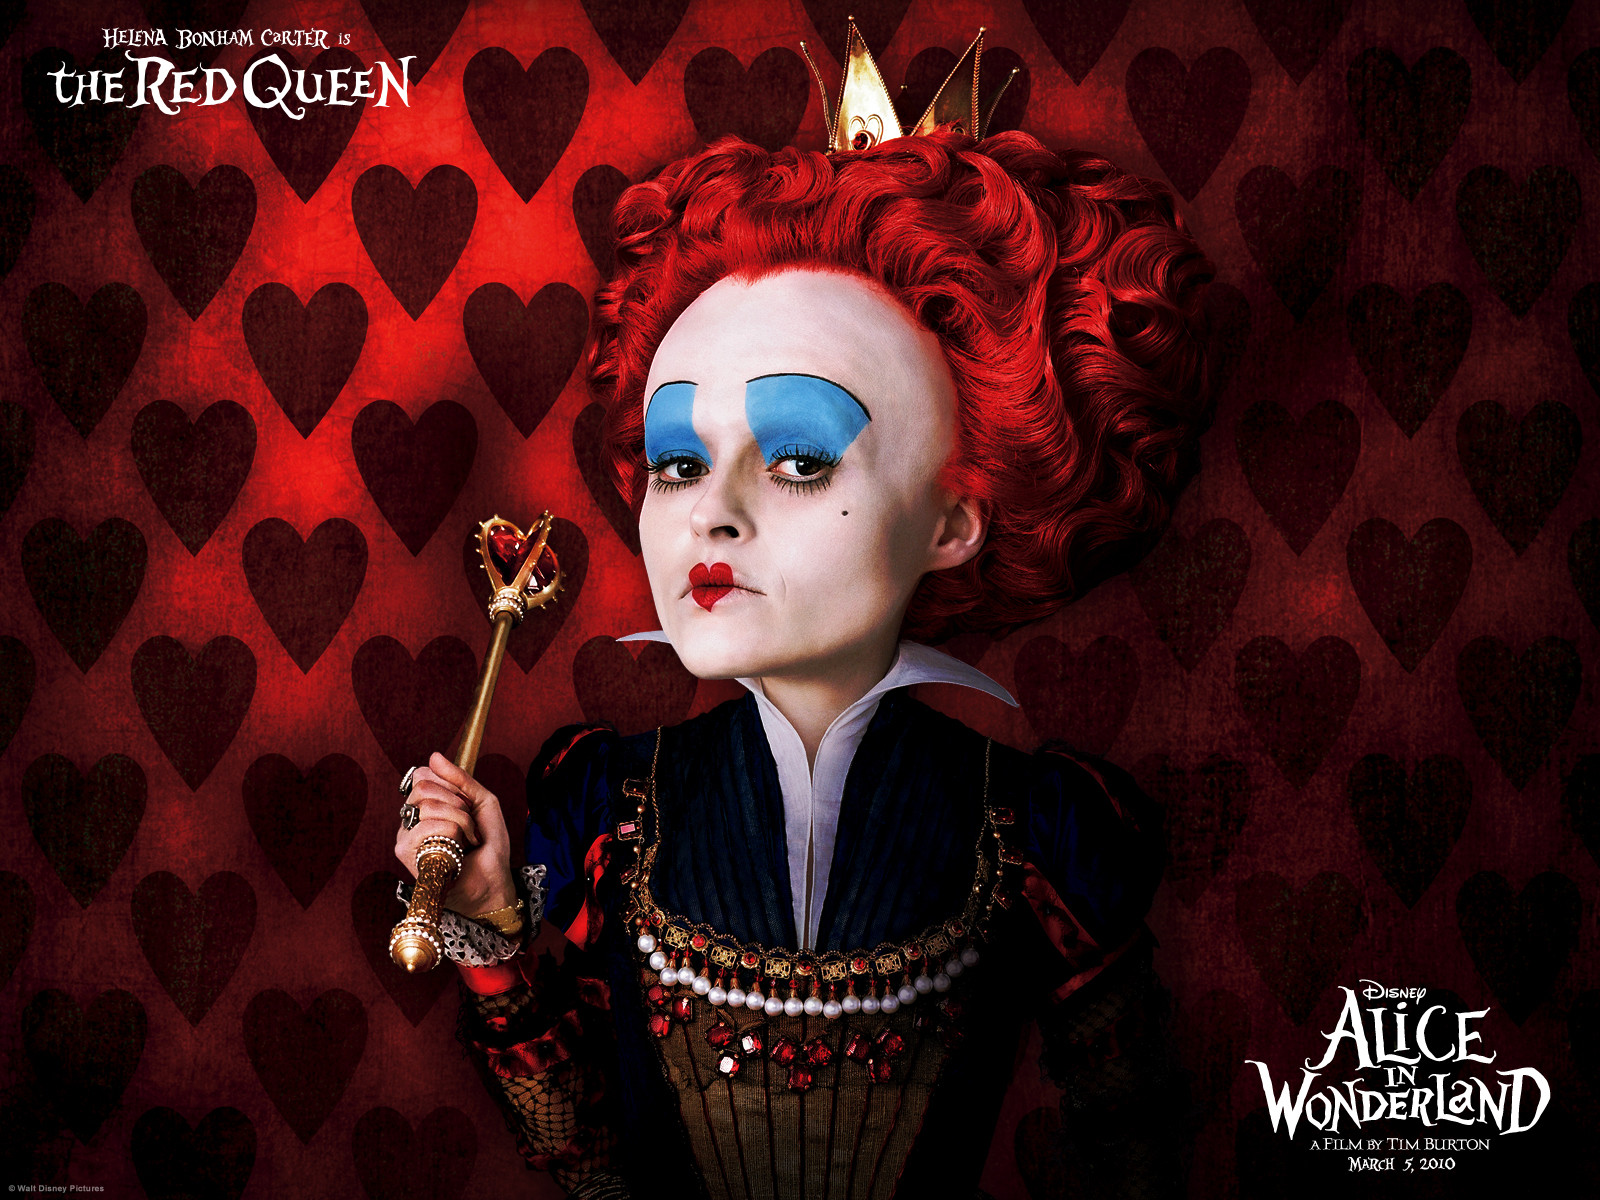 Alice in Wonderland Movie HD Wallpapers and ScreenSaver @ Leawo